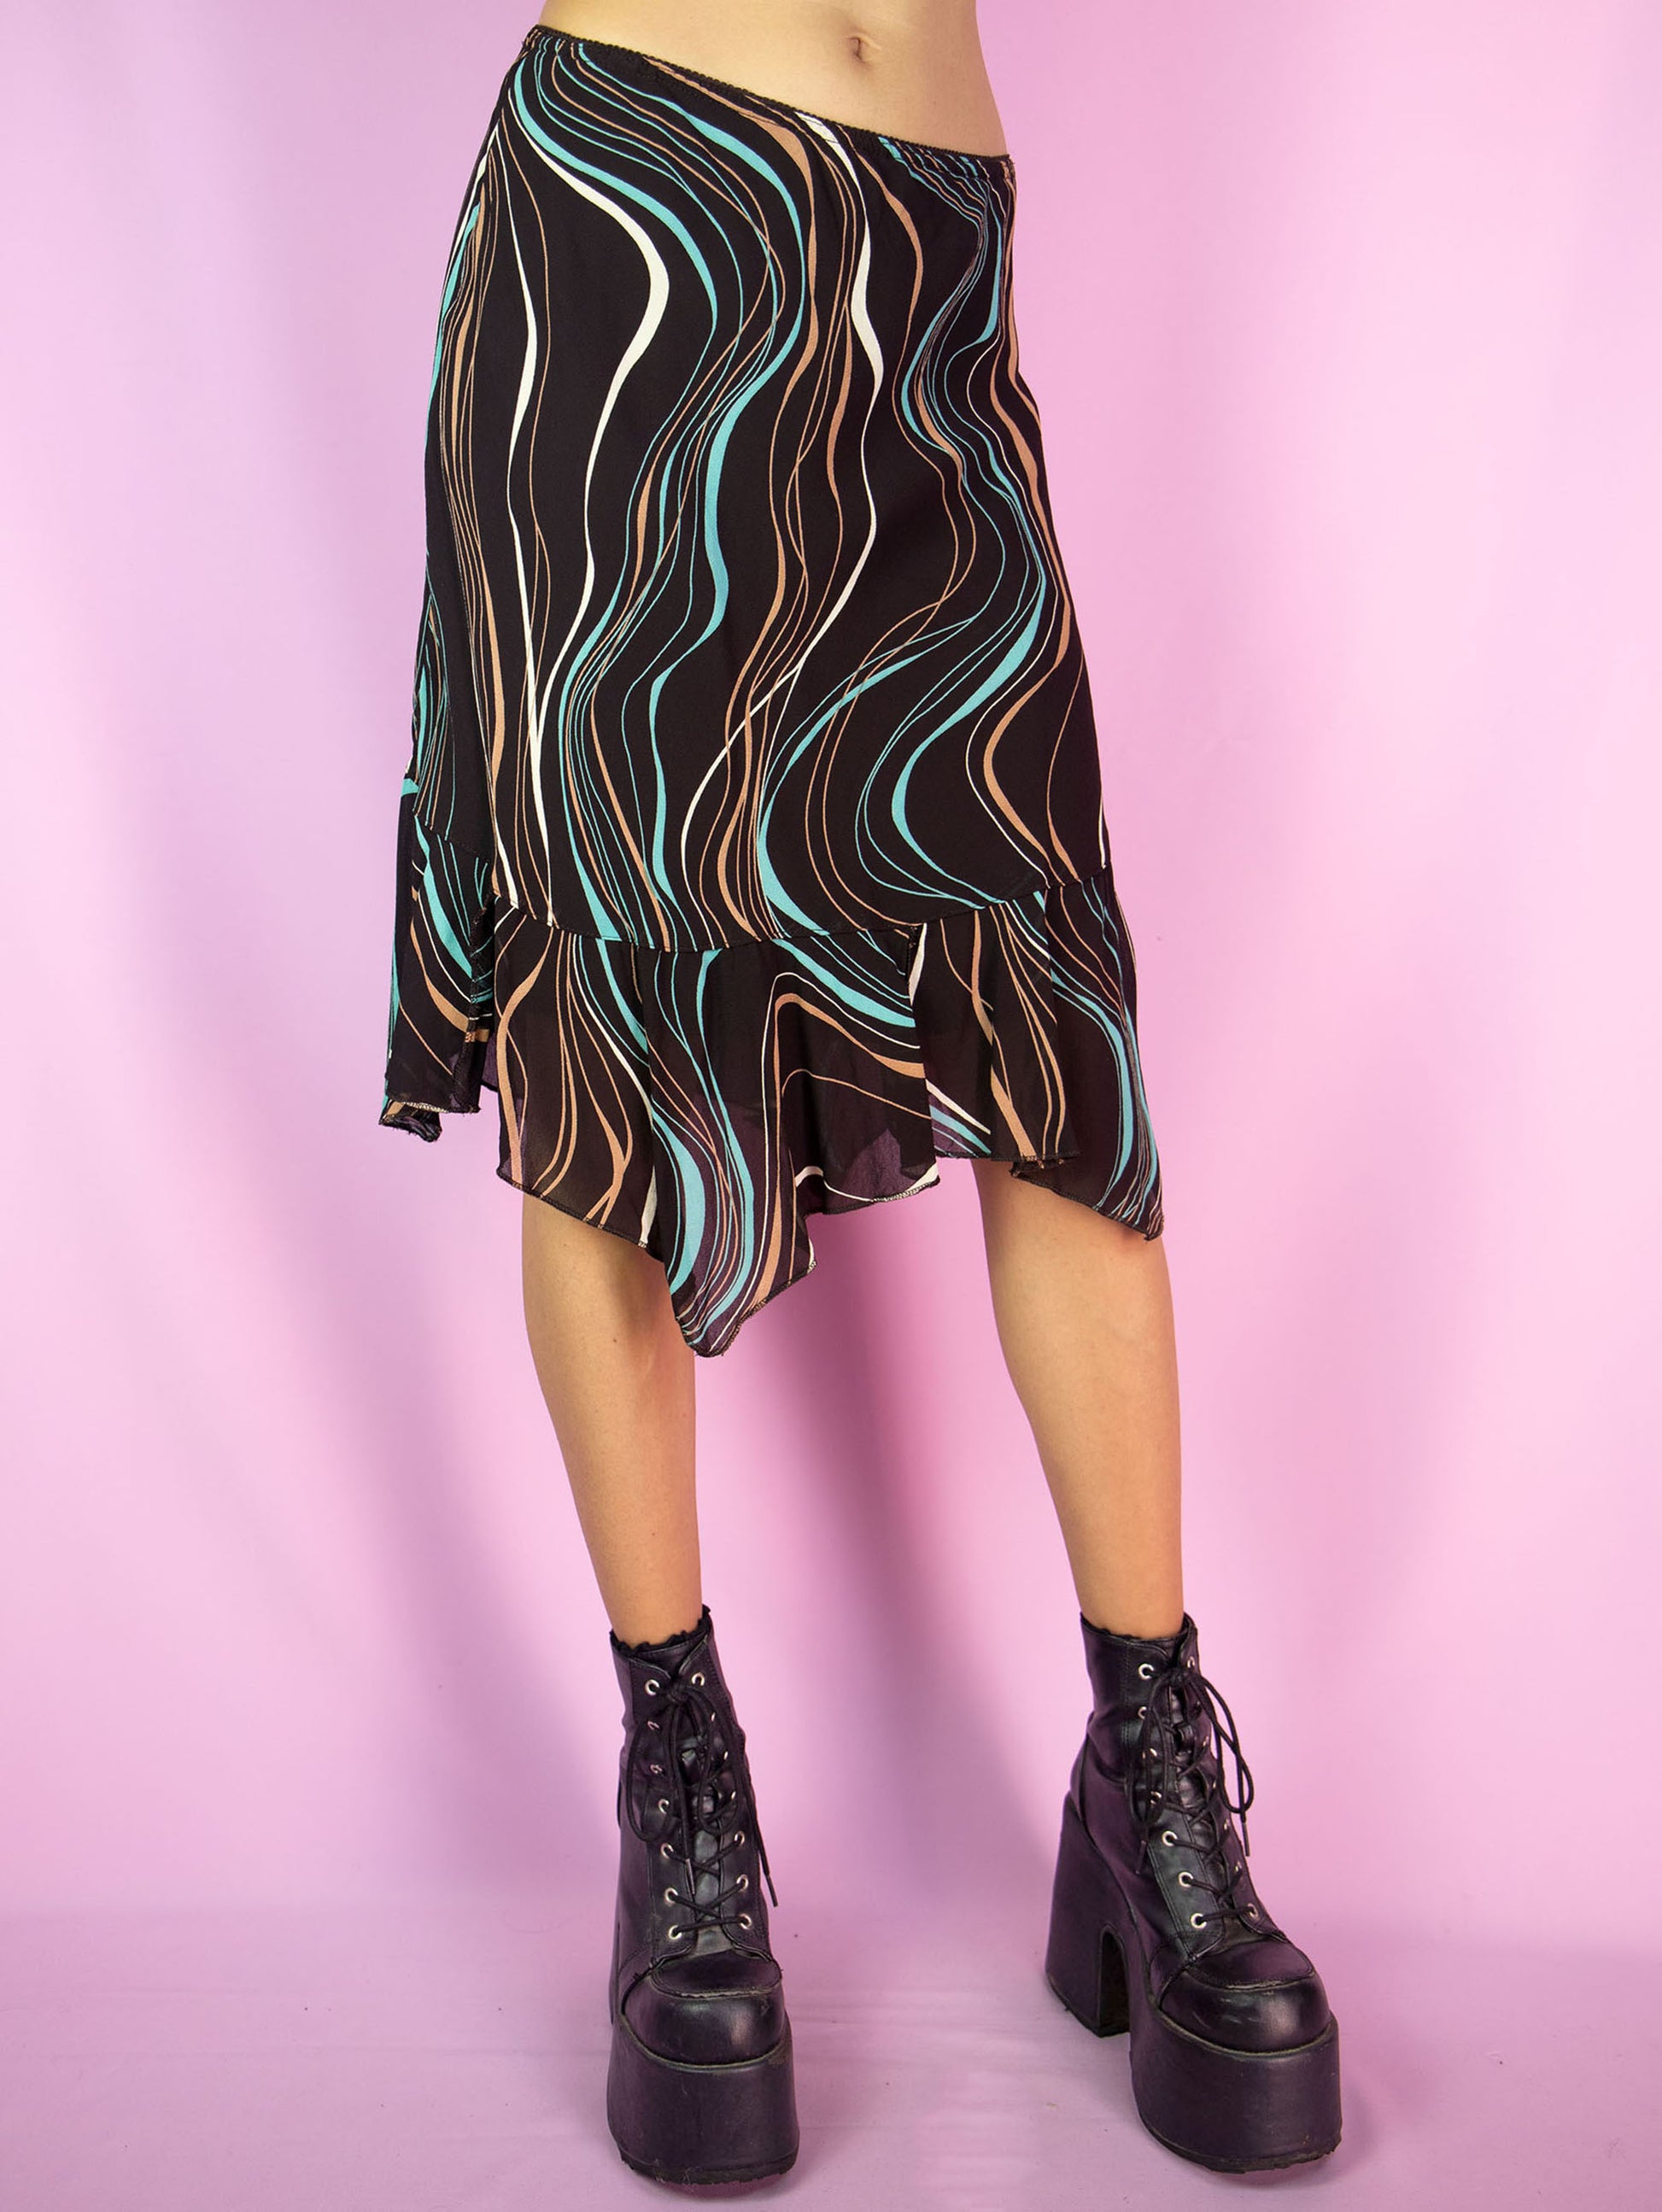 The Y2K Brown Handkerchief Mini Skirt is a vintage abstract striped printed skirt with an elasticated waist, and an asymmetrical pointed hem. Cyber fairy grunge 2000s boho summer midi skirt.